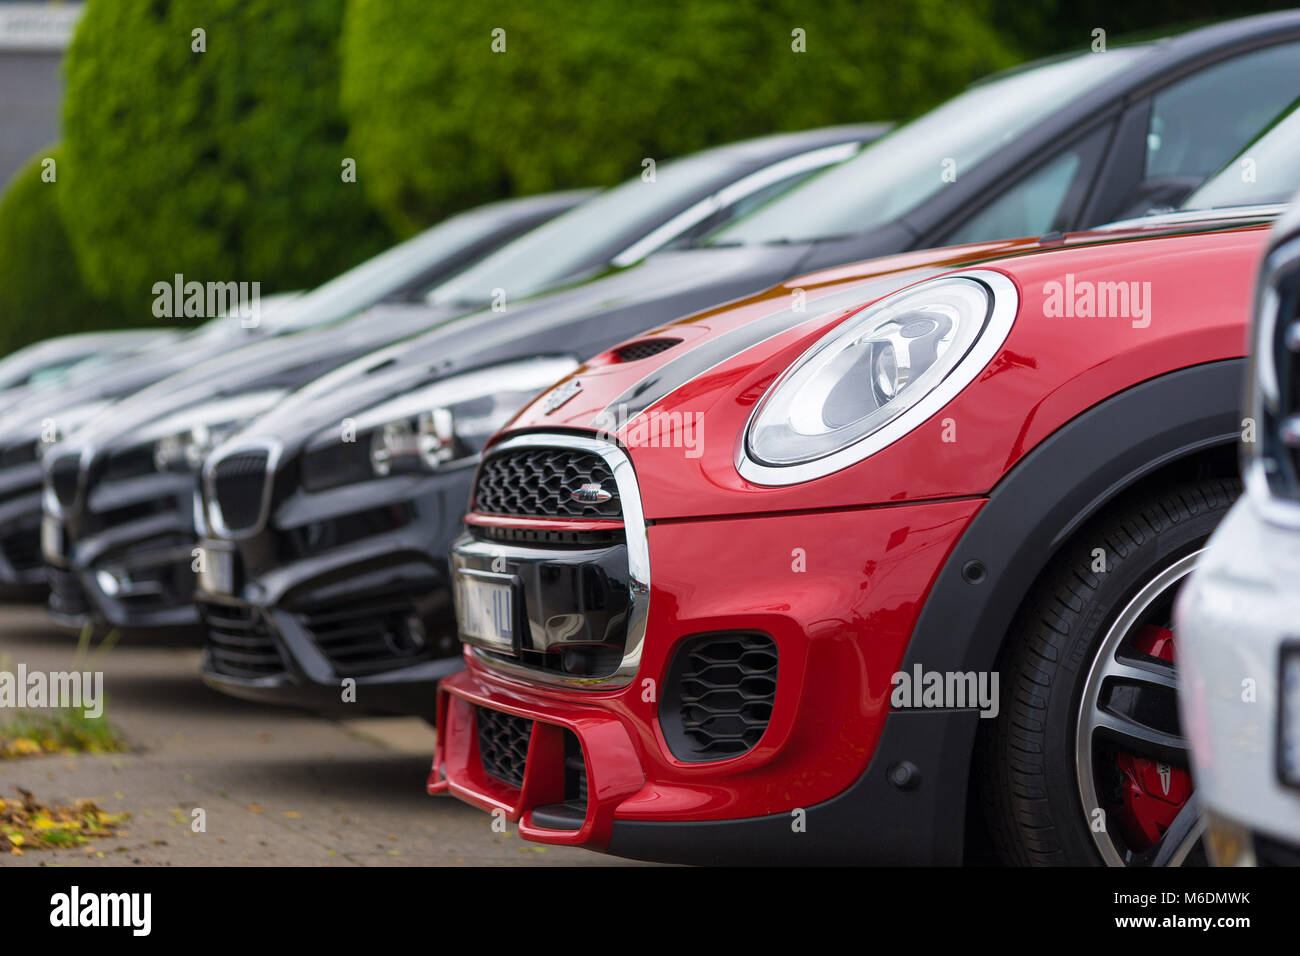 A lineup of brand new Mini and BMW cars at the dealership Stock Photo